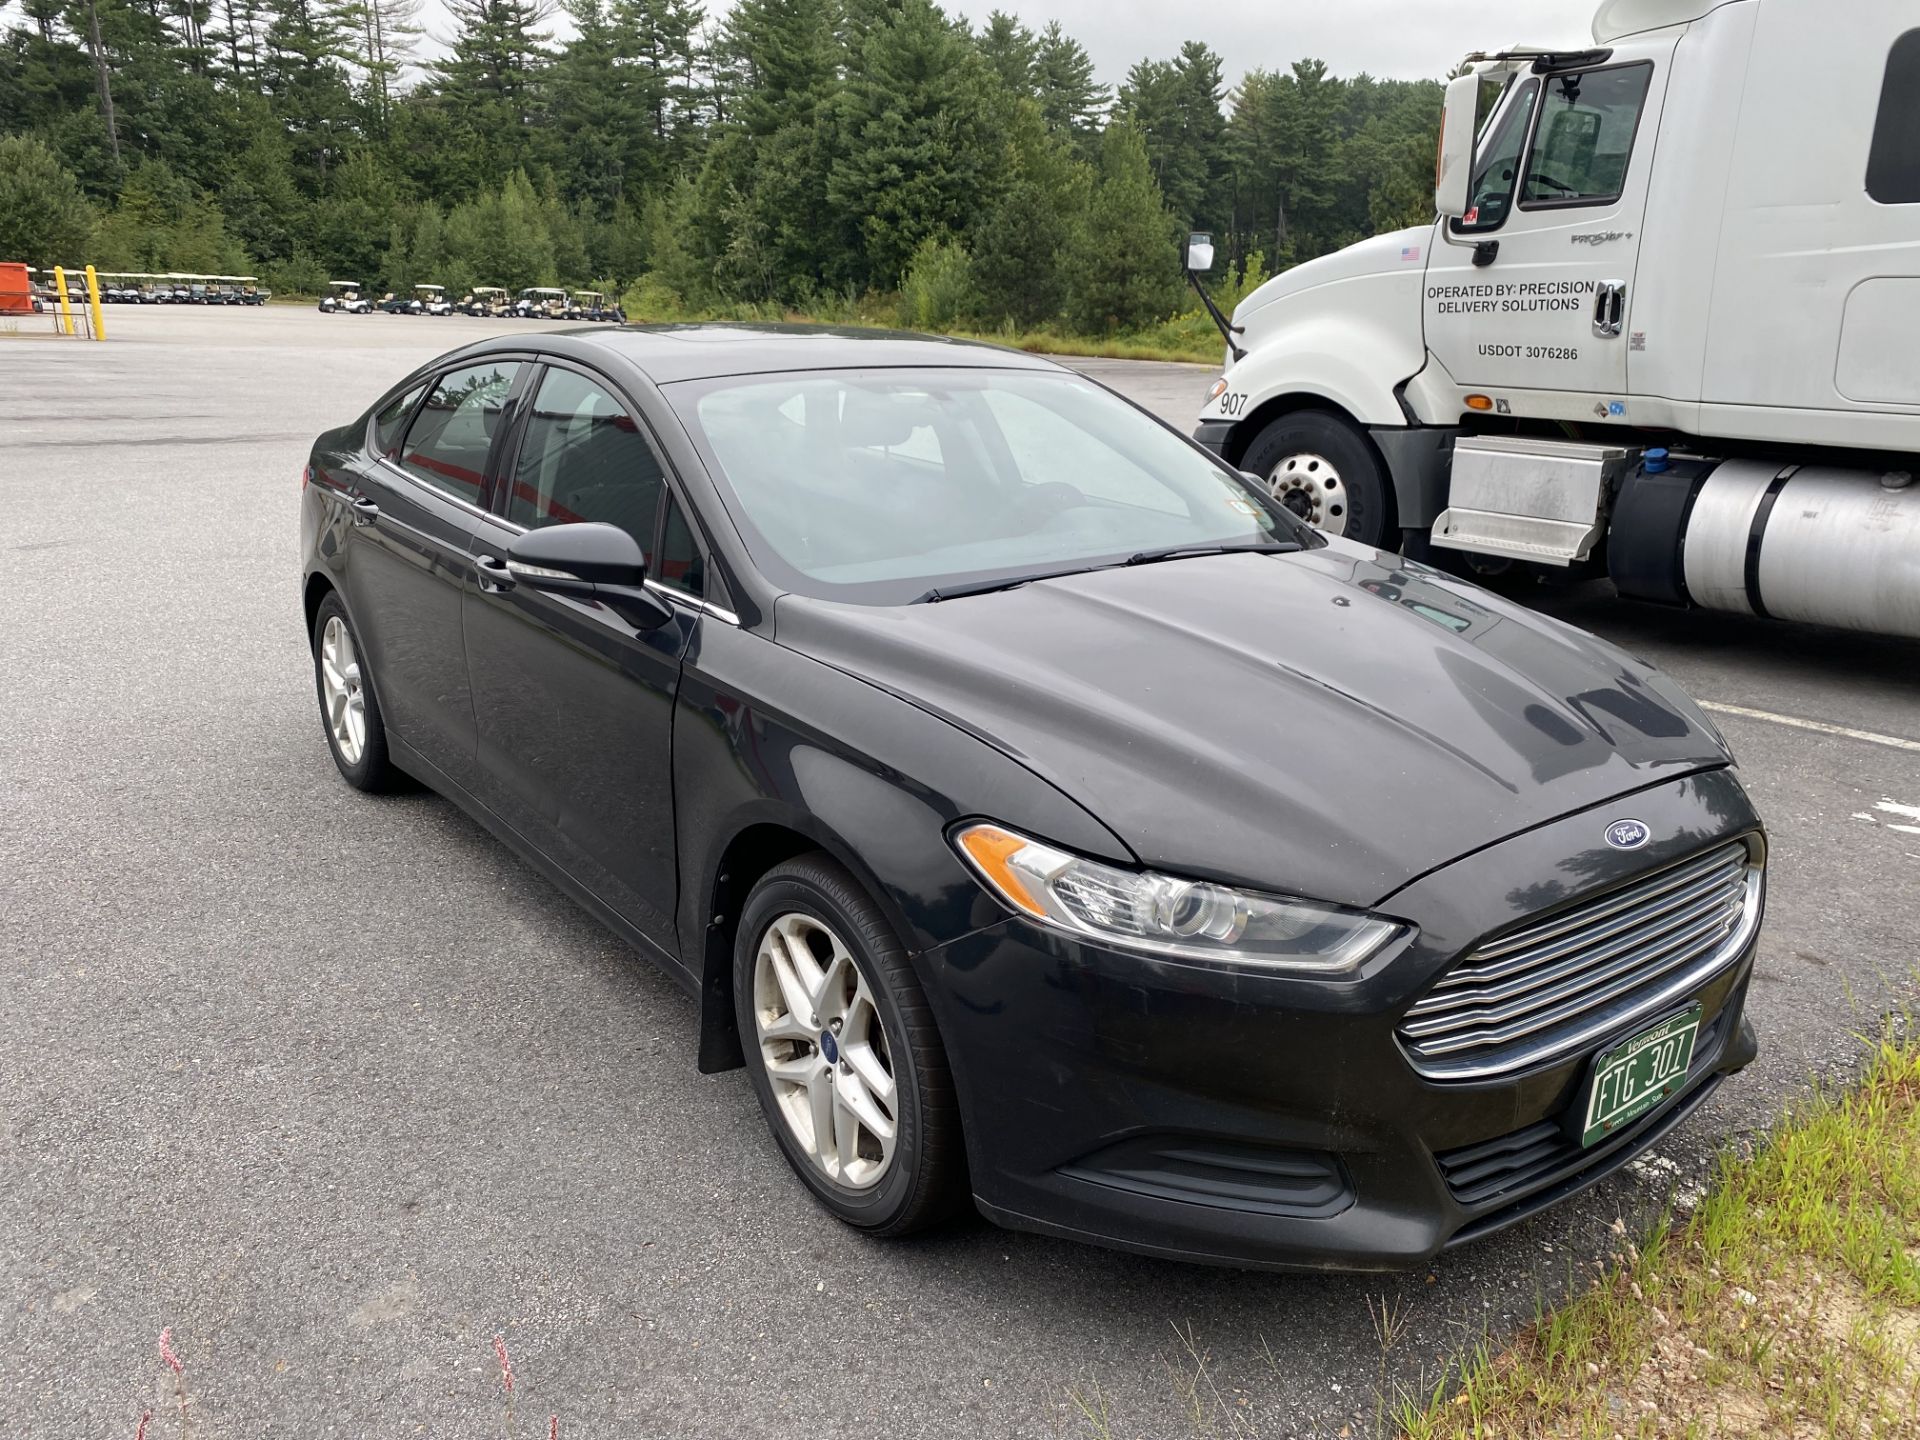 2013 Ford Fusion SE, AWD, Odom: 218,227, VIN#: 3FA6P0H79DR144410 (Starts - See Video) - Image 2 of 6